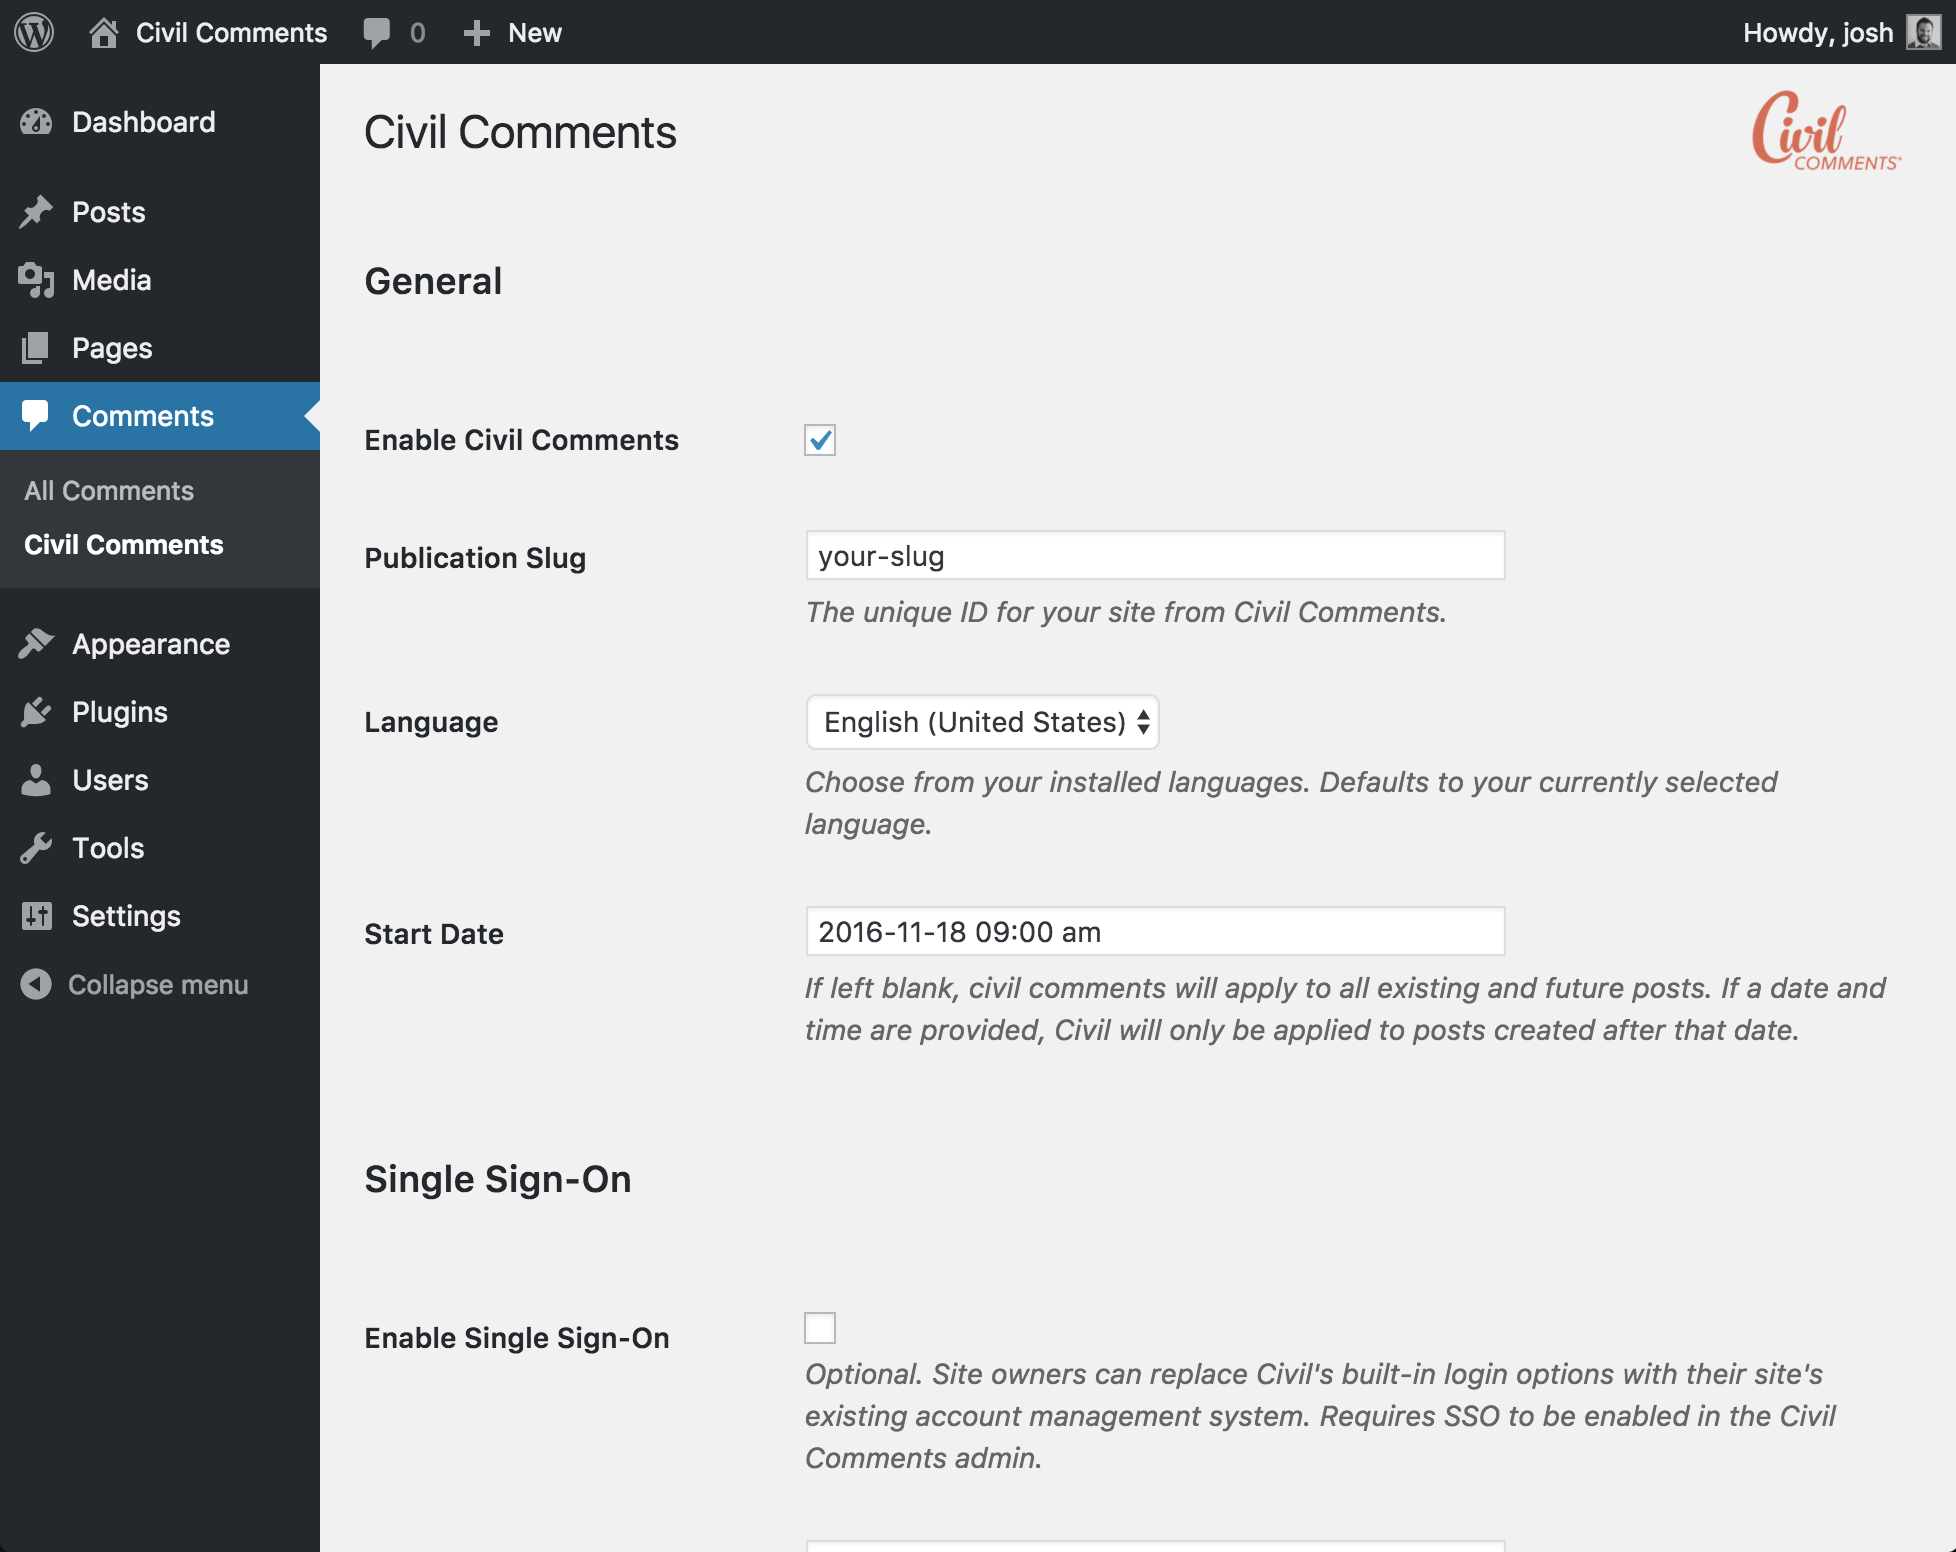 The Civil Comments settings page.